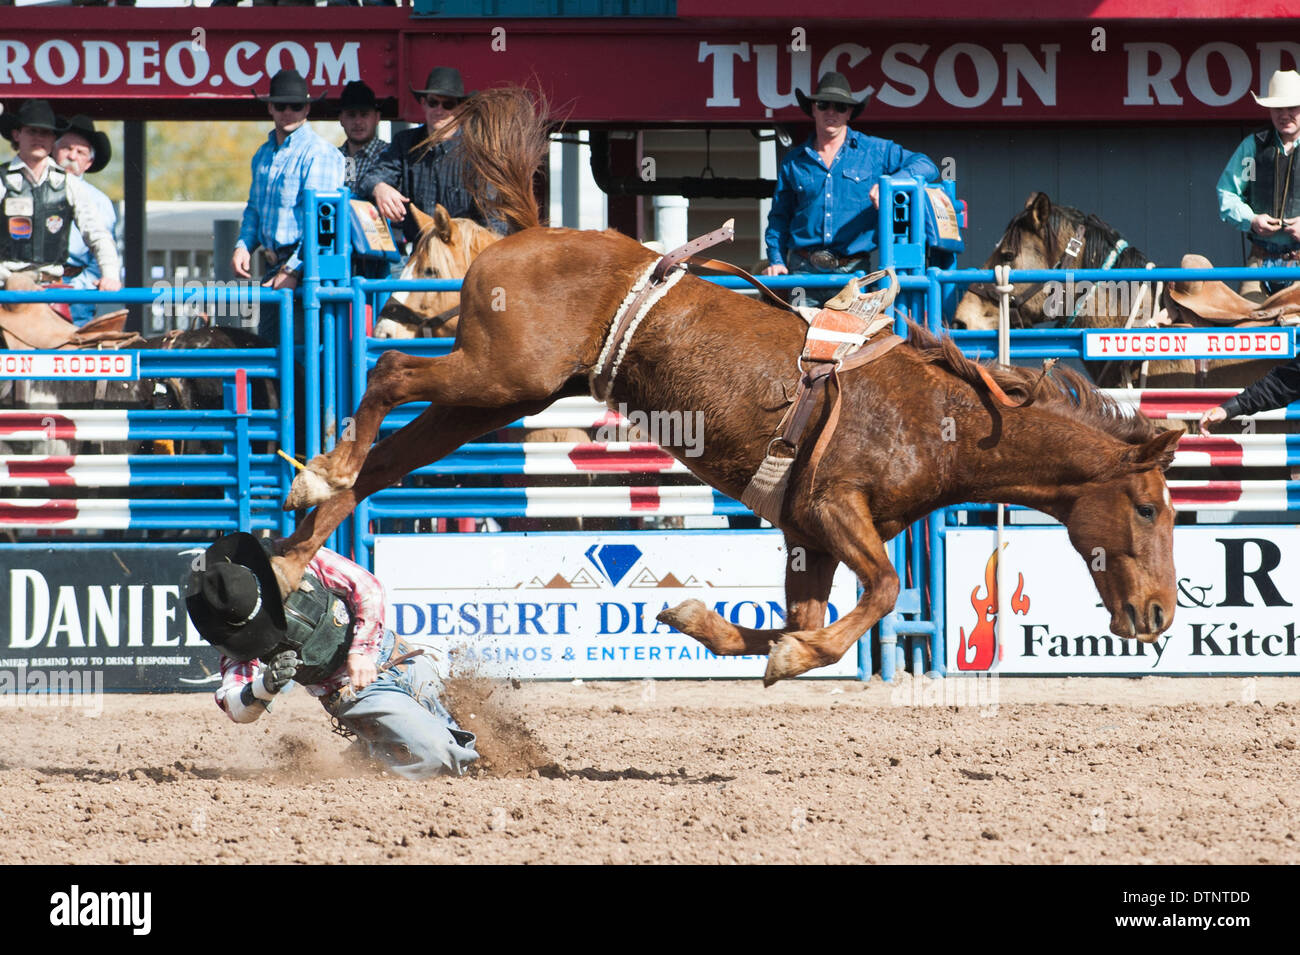 Tucson, Arizona, USA. 21st Feb, 2014. Bareback rider JARED GREEN gets kicked in the head after being thrown from his horse during the fourth performance of the Fiesta de los Vaqueros in Tucson, Ariz. Green was able to walk out of the arena on his own. Credit:  Will Seberger/ZUMAPRESS.com/Alamy Live News Stock Photo